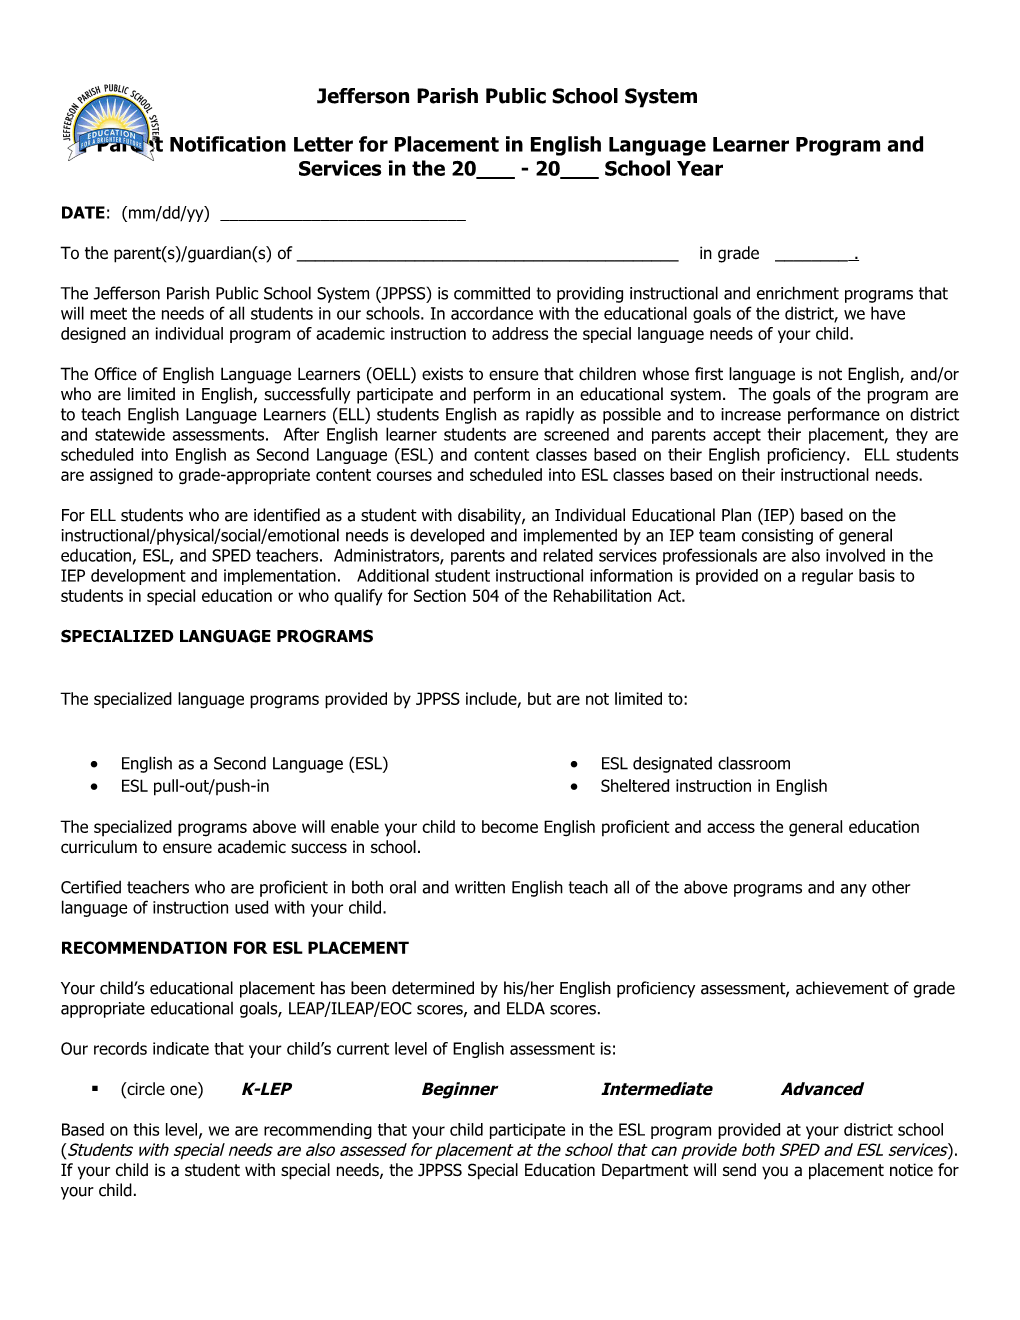 Parent Notification Letter for Placement in English Language Learner Program and Services